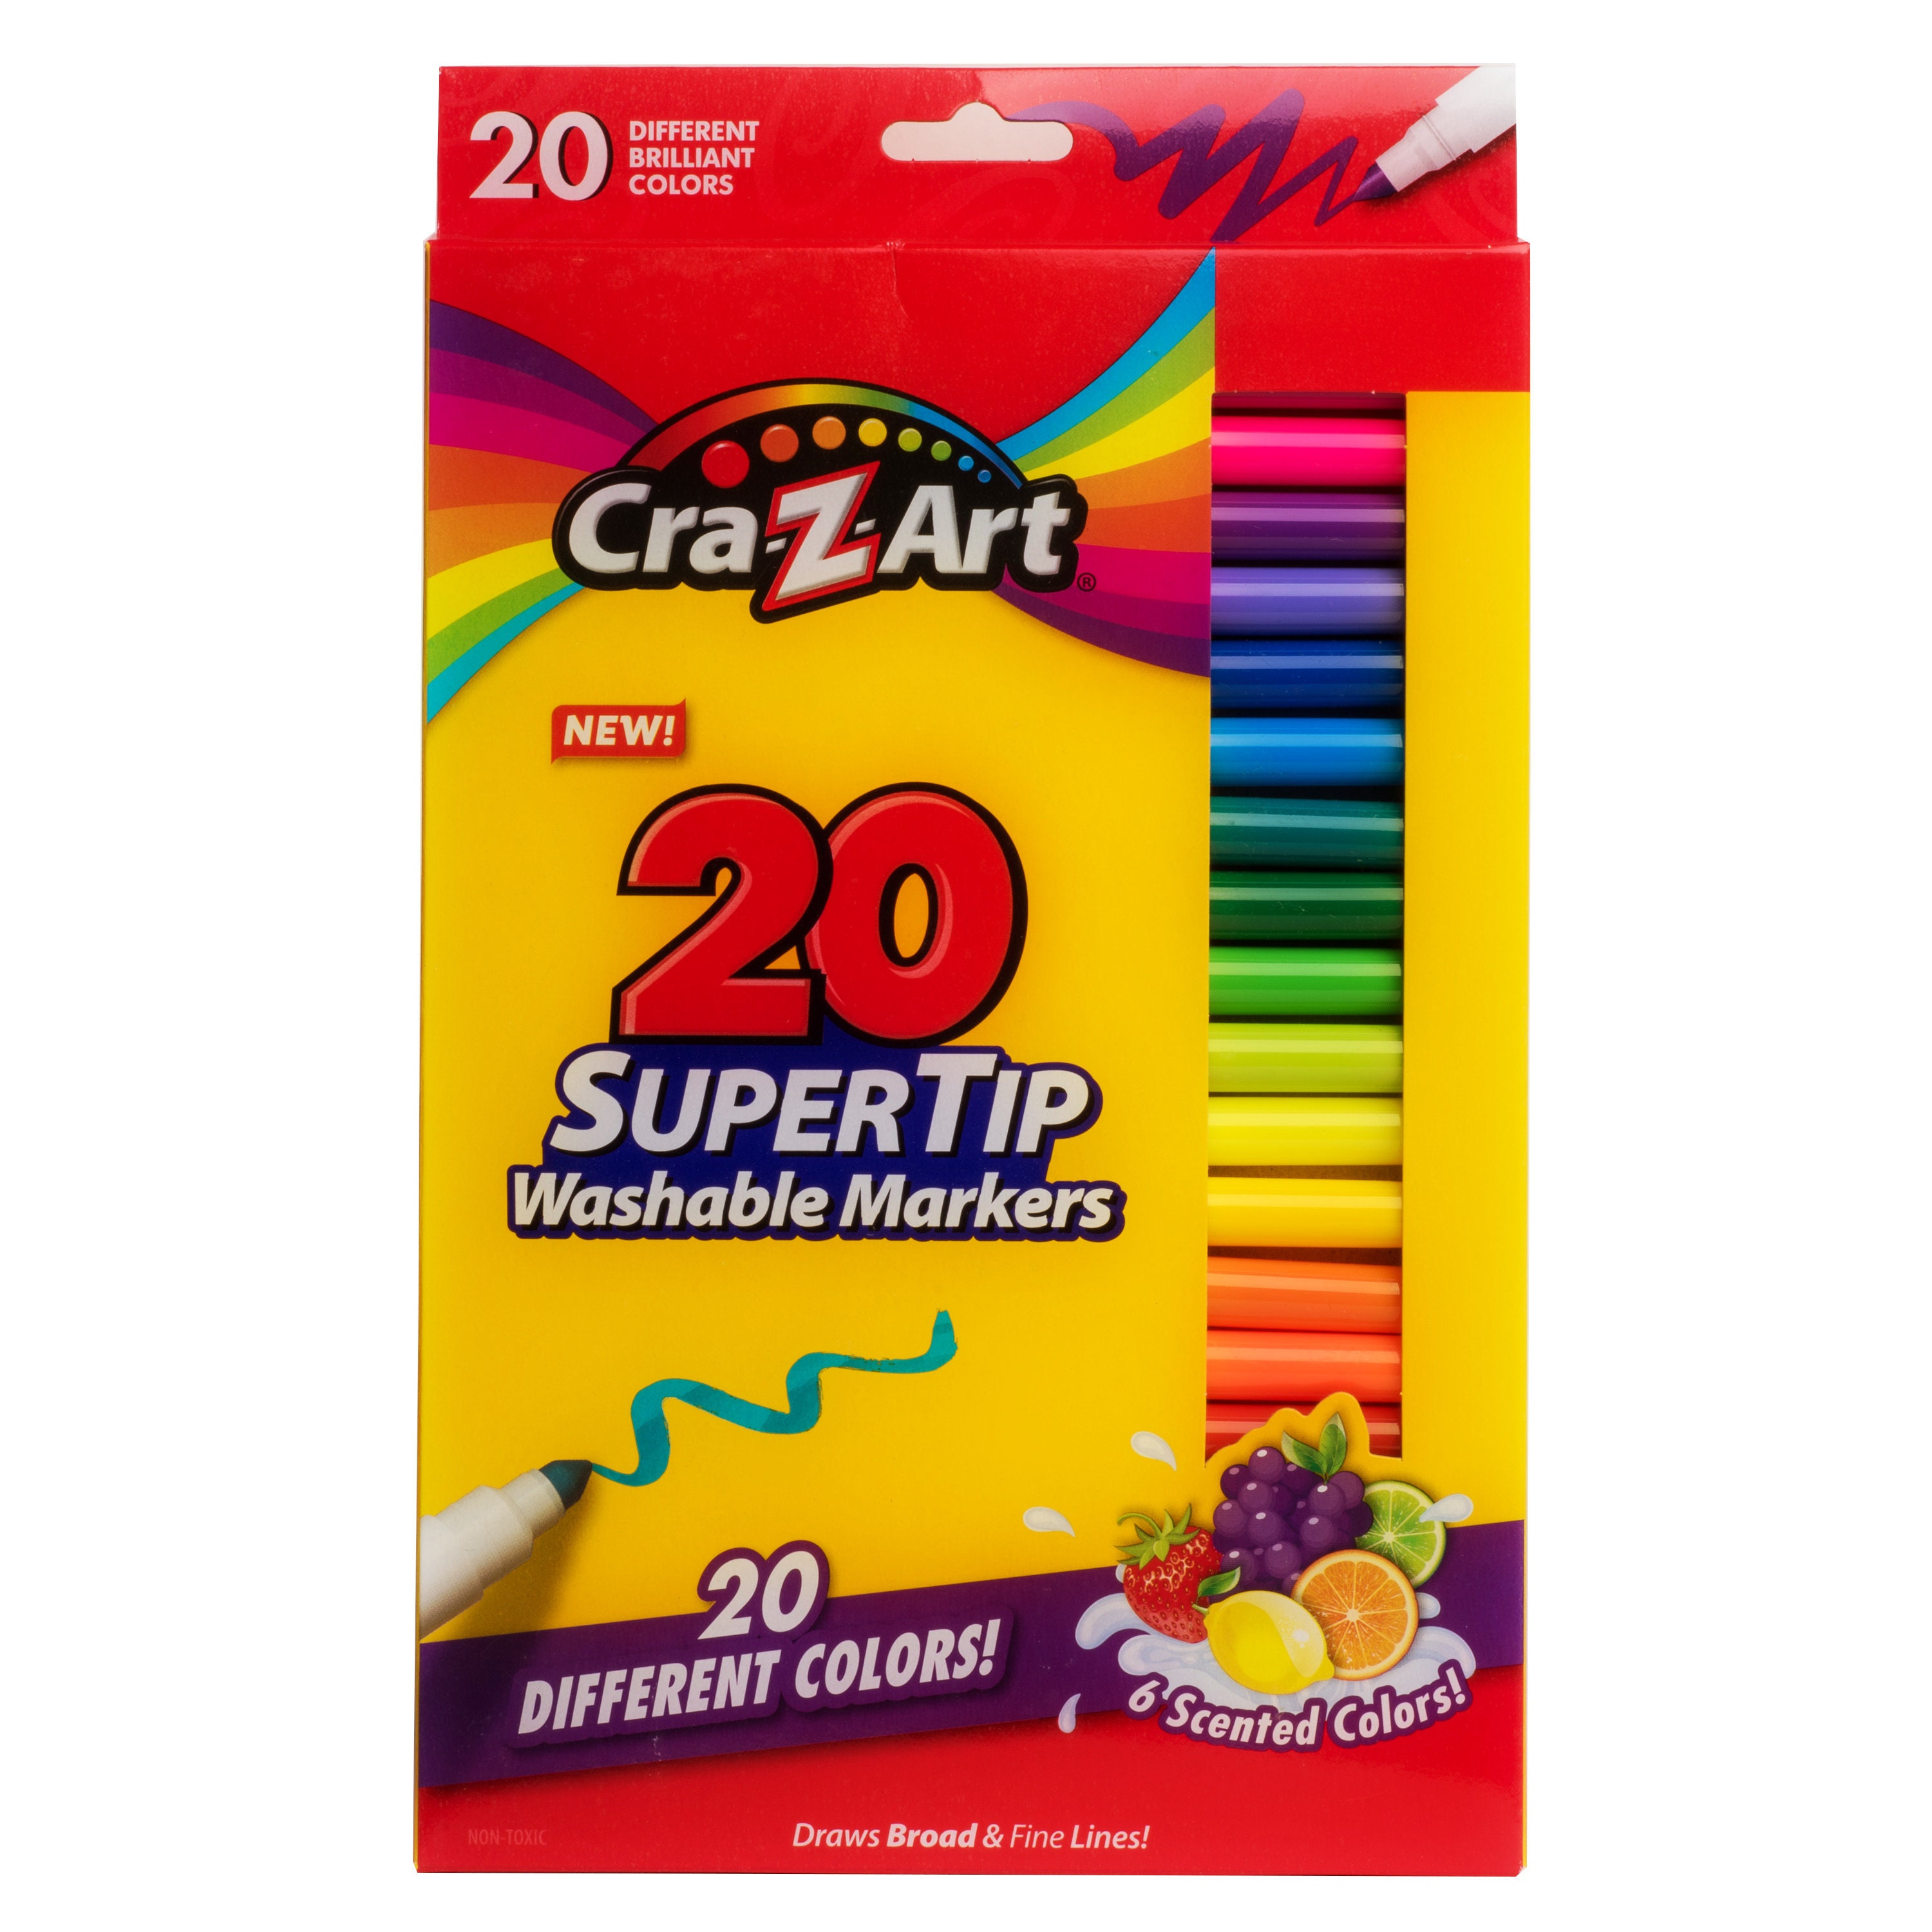 Cra-Z-Art Super Washable Markers, non-toxic, assorted bright colors, 12 ct,  New